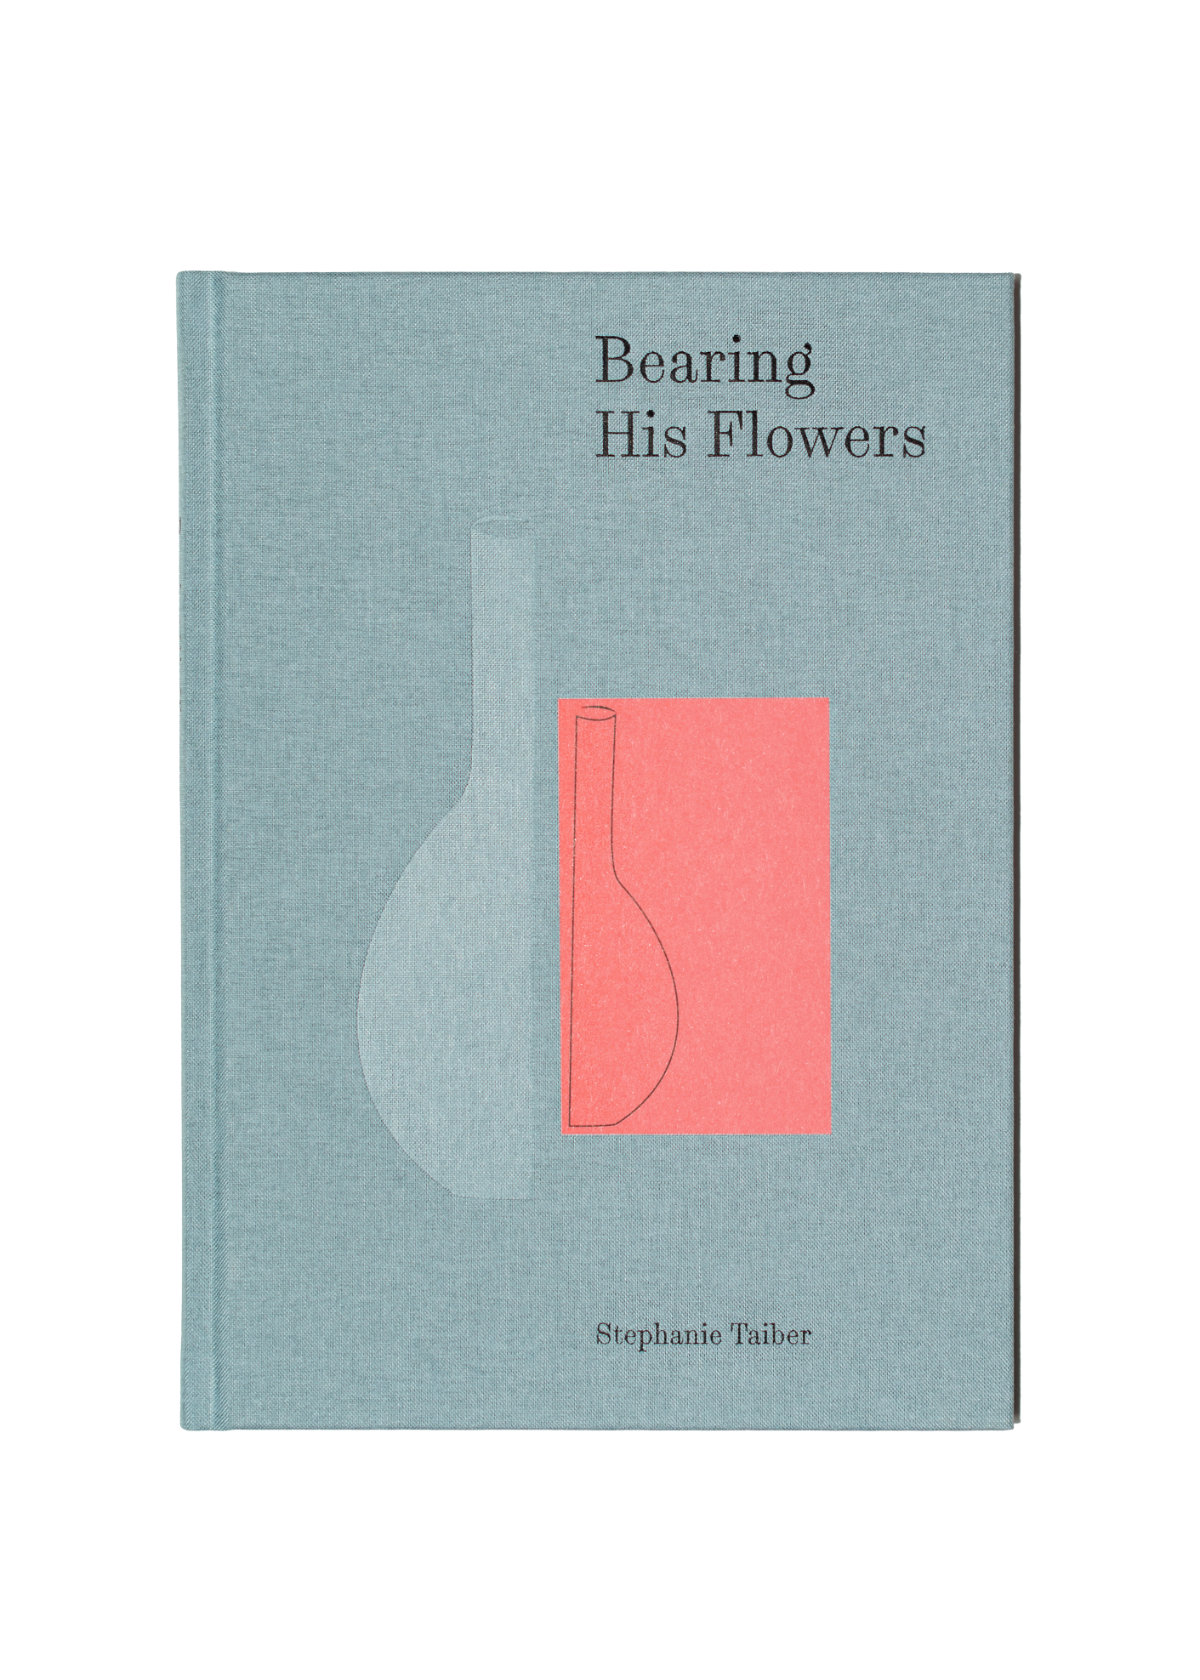 A photo of a book cover that includes the title "Bearing His Flowers", the artist's name Stephanie Taiber and the simple outlines of a pair of flower vases with long necks in light blues, salmon and simple outlines